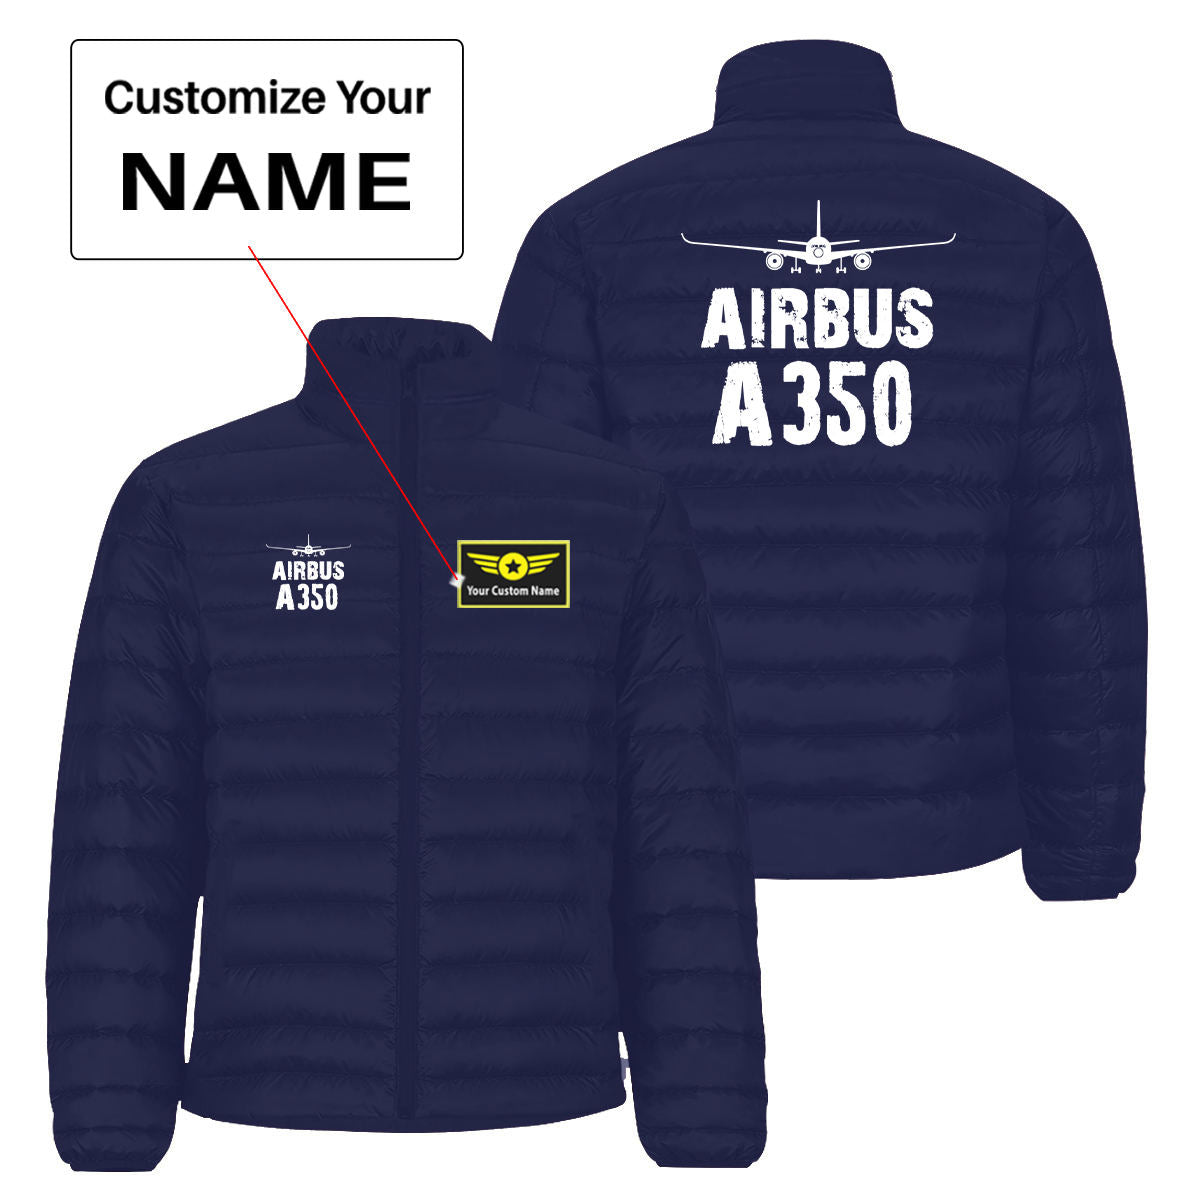 Airbus A350 & Plane Designed Padded Jackets